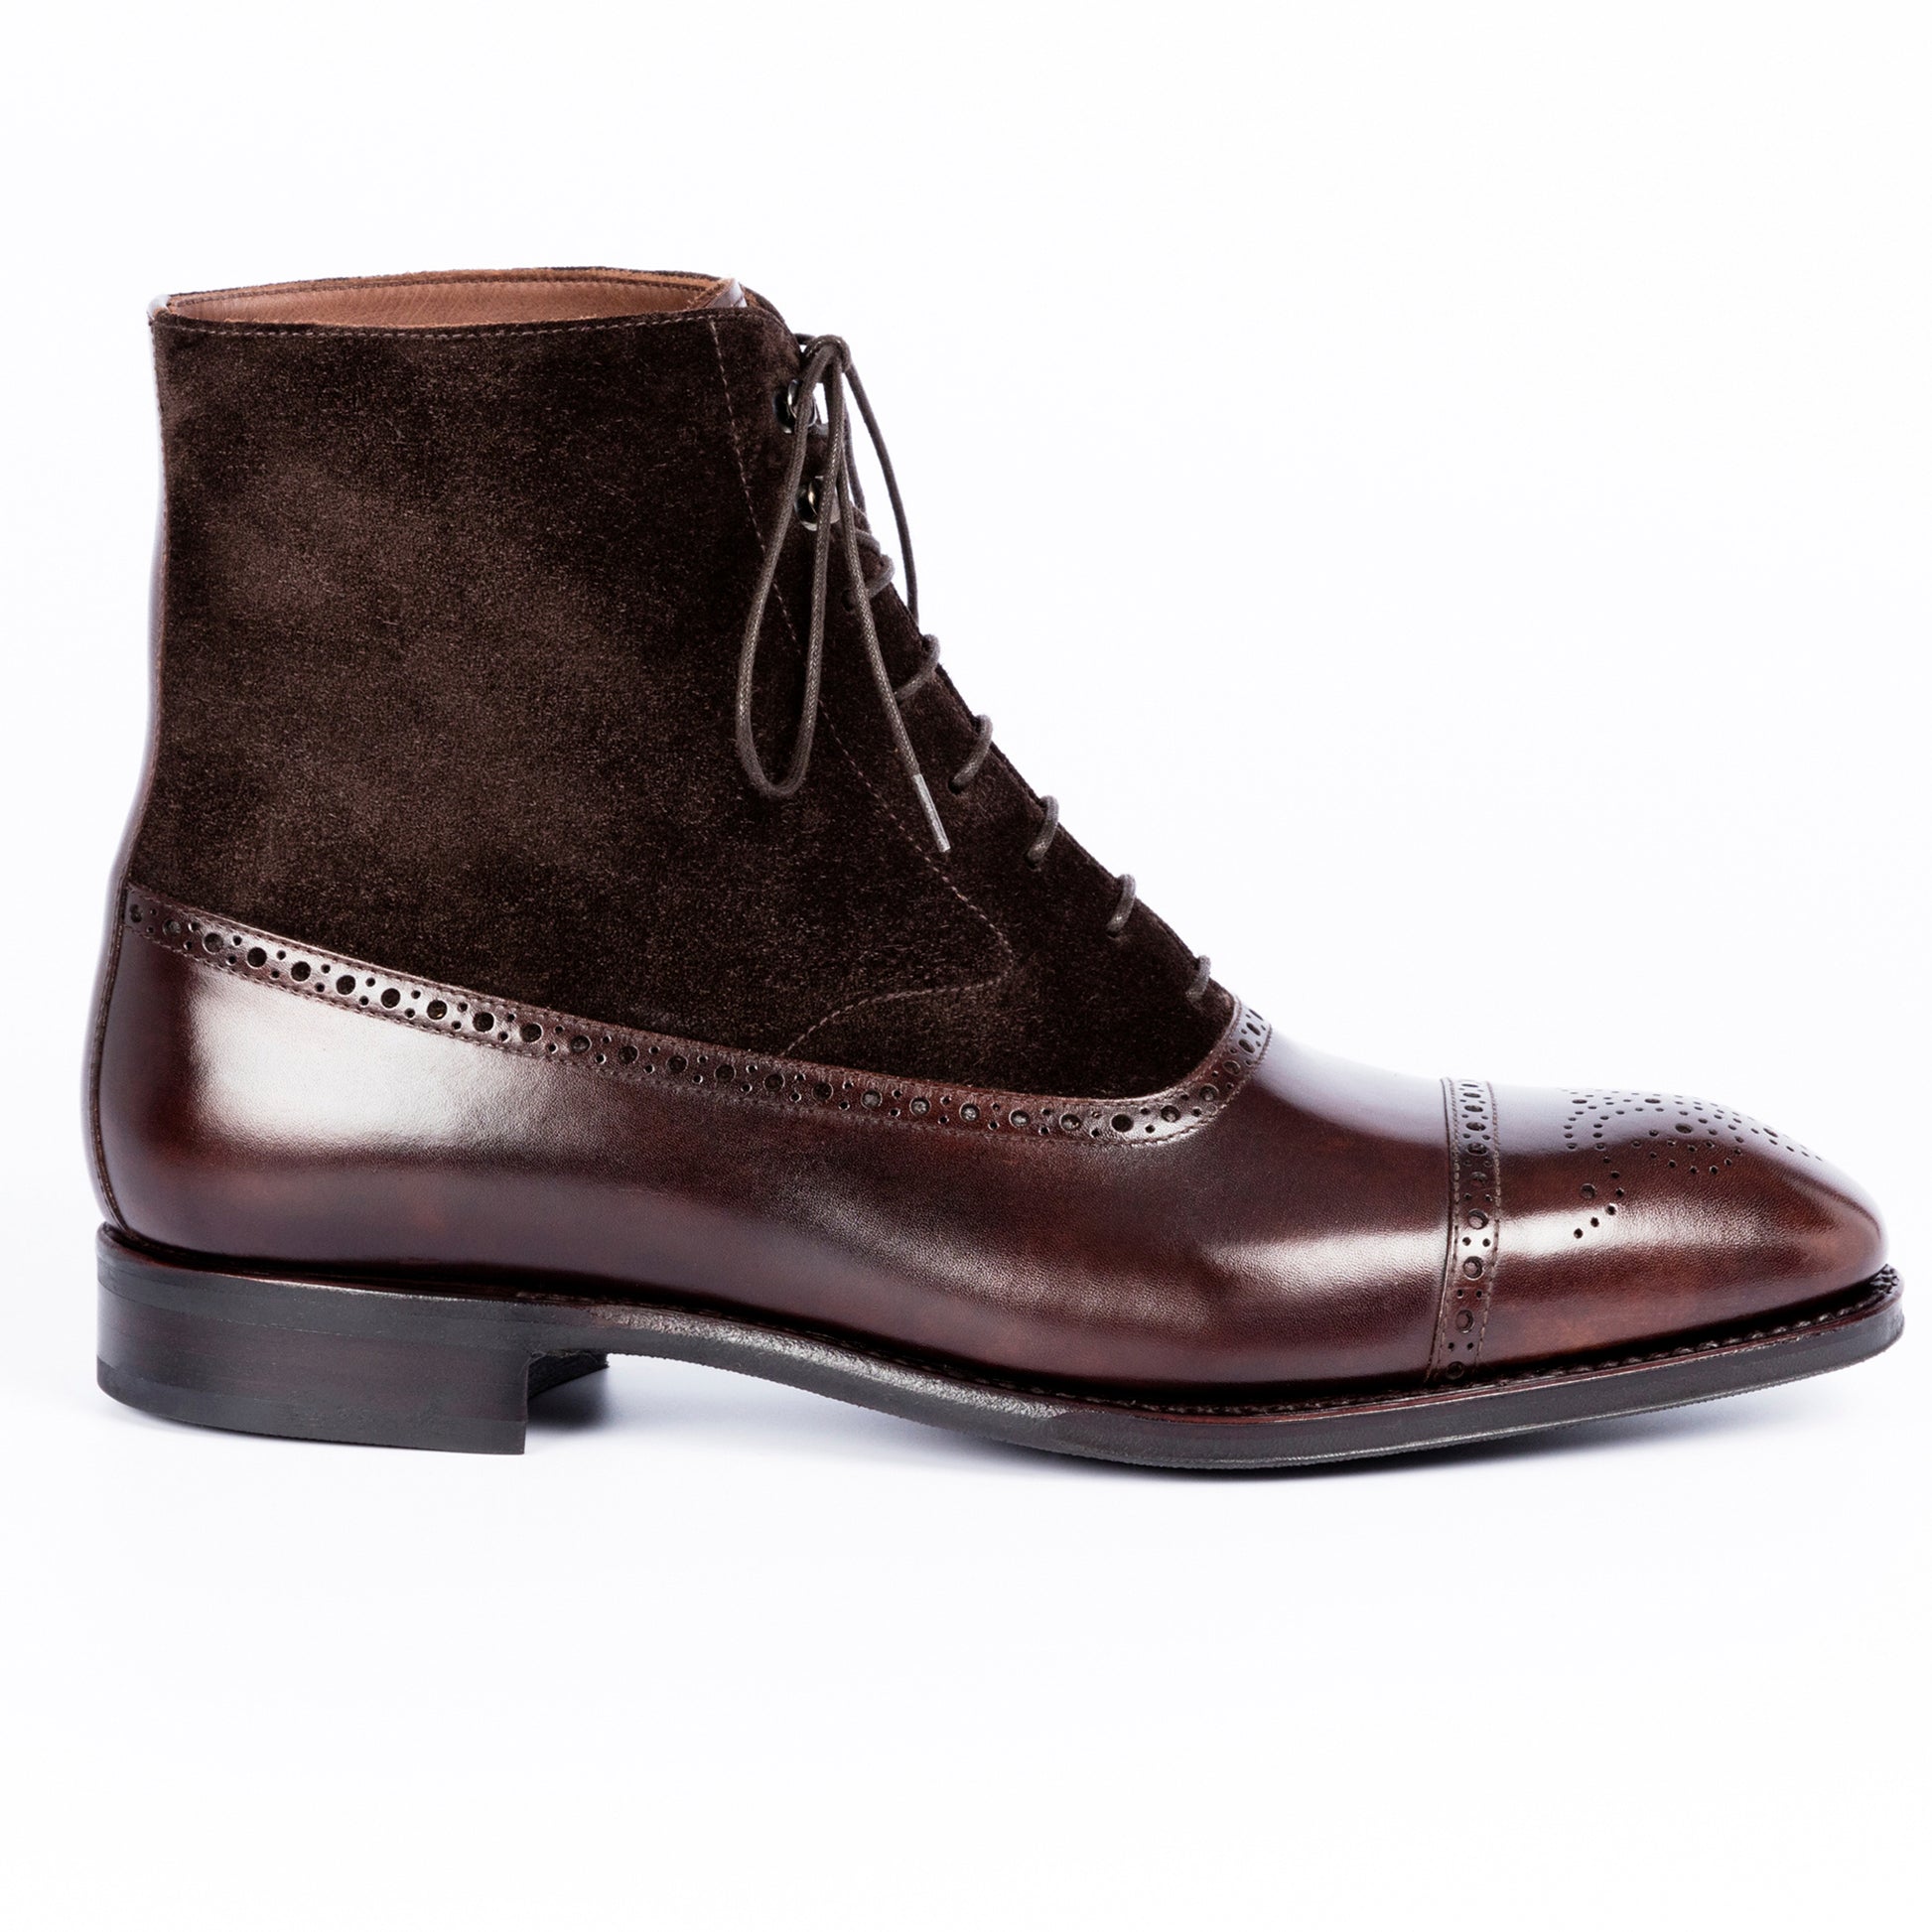 TLB Mallorca leather shoes 576 / ALAN / MUSEUM CALF BROWN & SUEDE BROWN